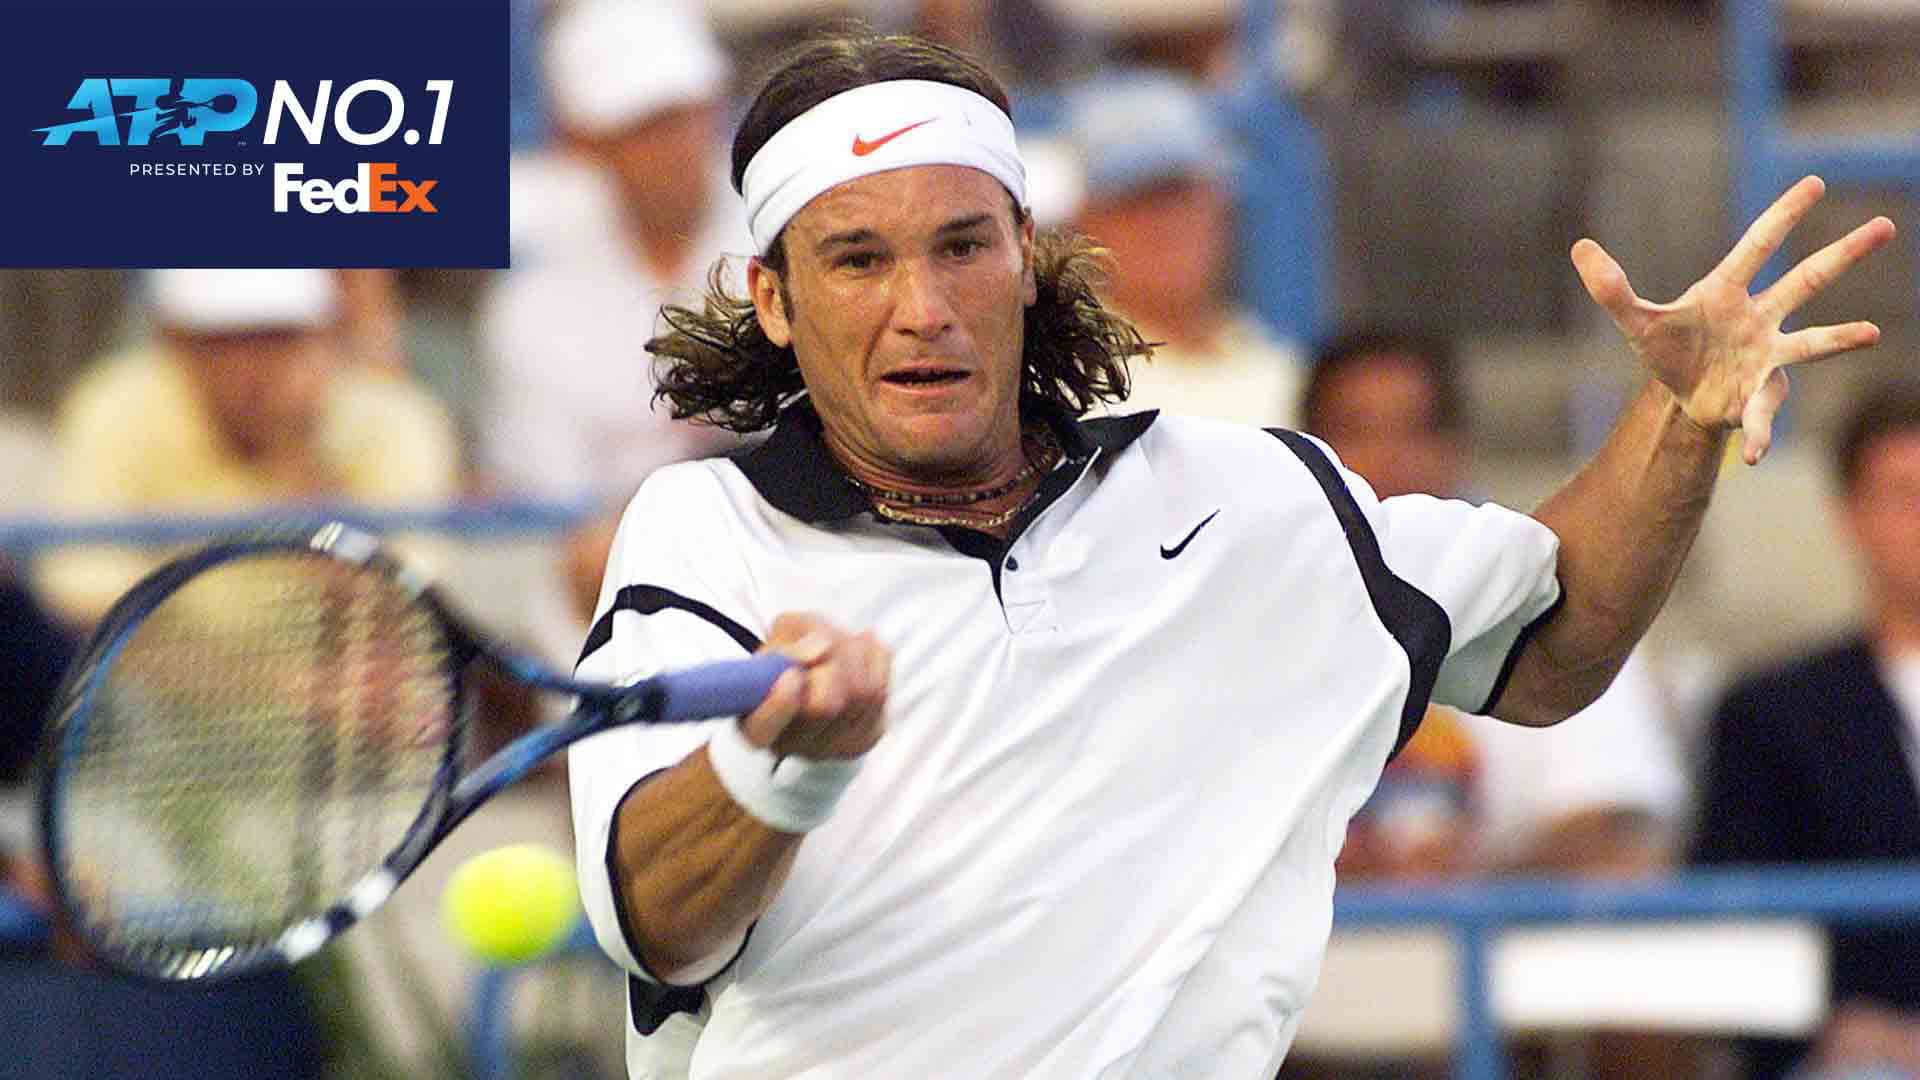 Carlos Moya racked up 575 tour-level wins throughout his career.